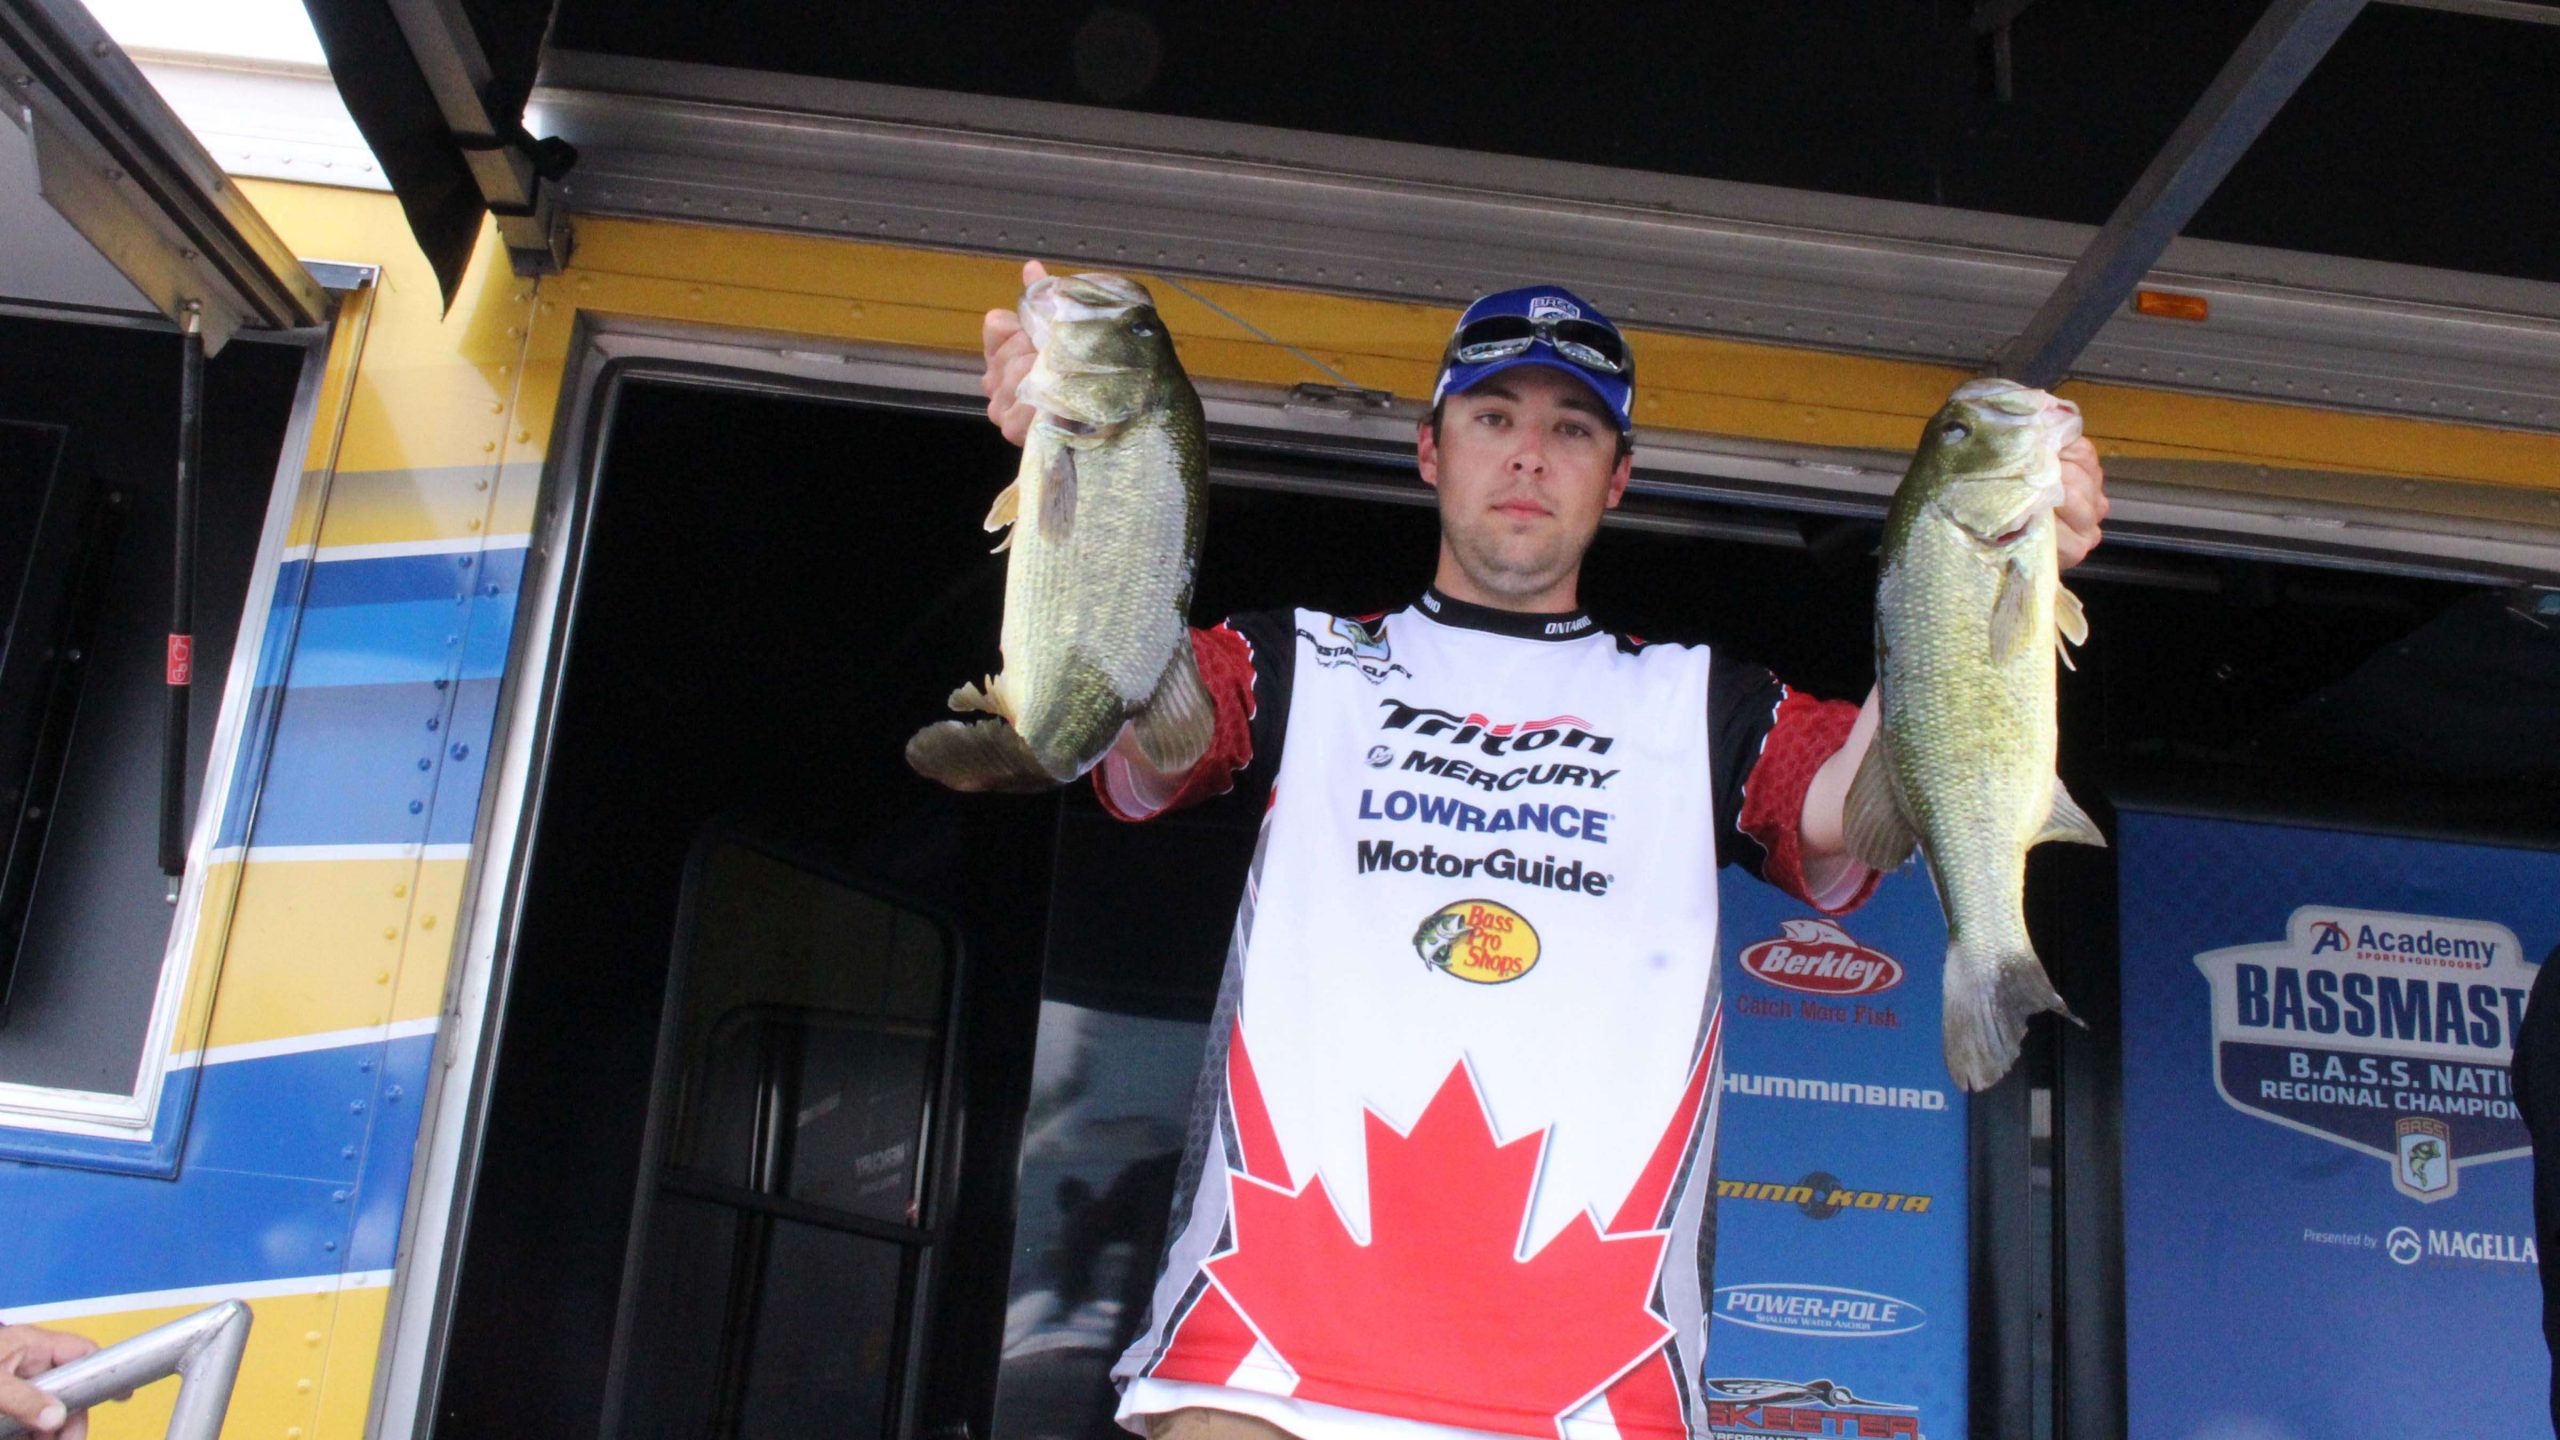 Christian Clancy, co-angler (19th, 9-3)